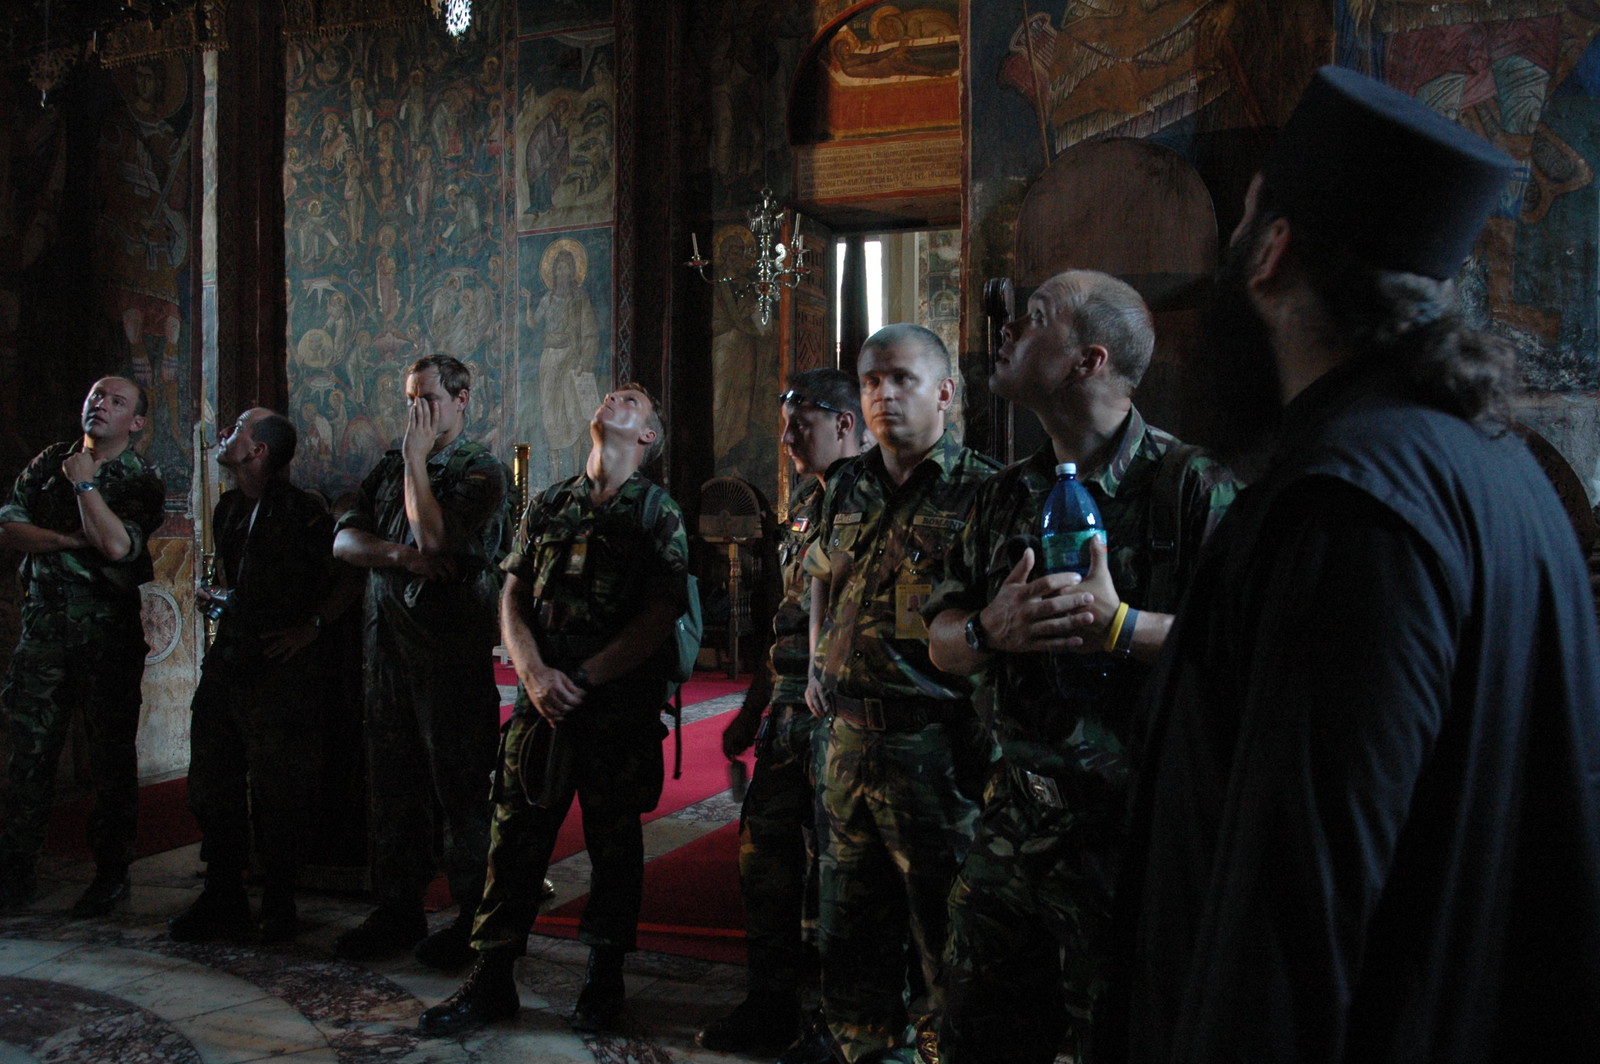 KFOR Soldiers visiting the Monastery 14